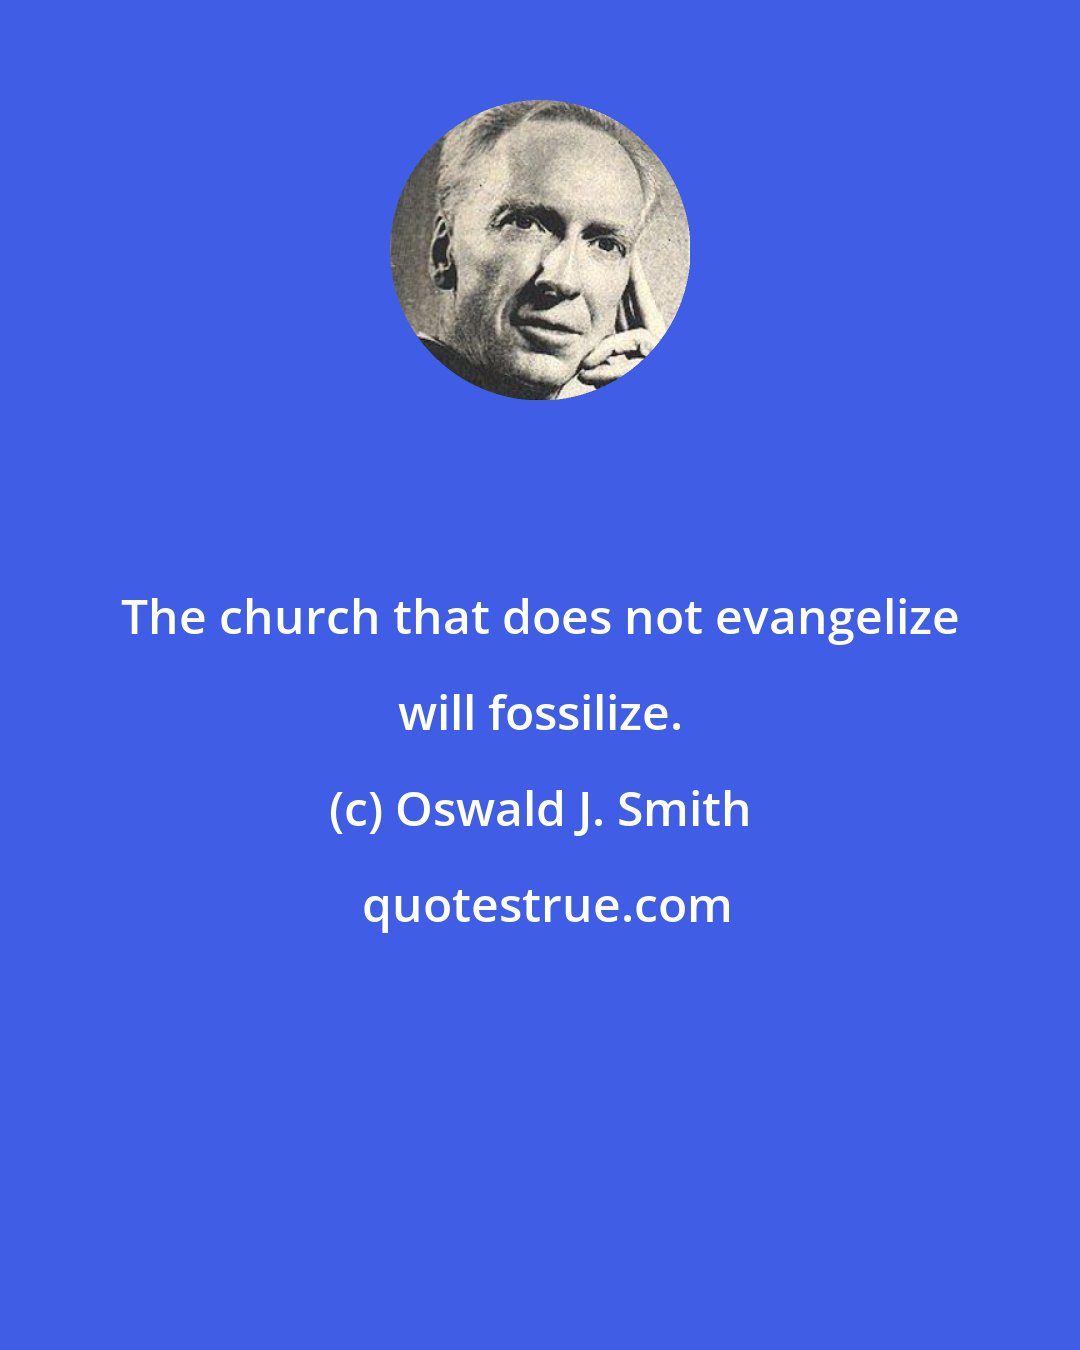 Oswald J. Smith: The church that does not evangelize will fossilize.